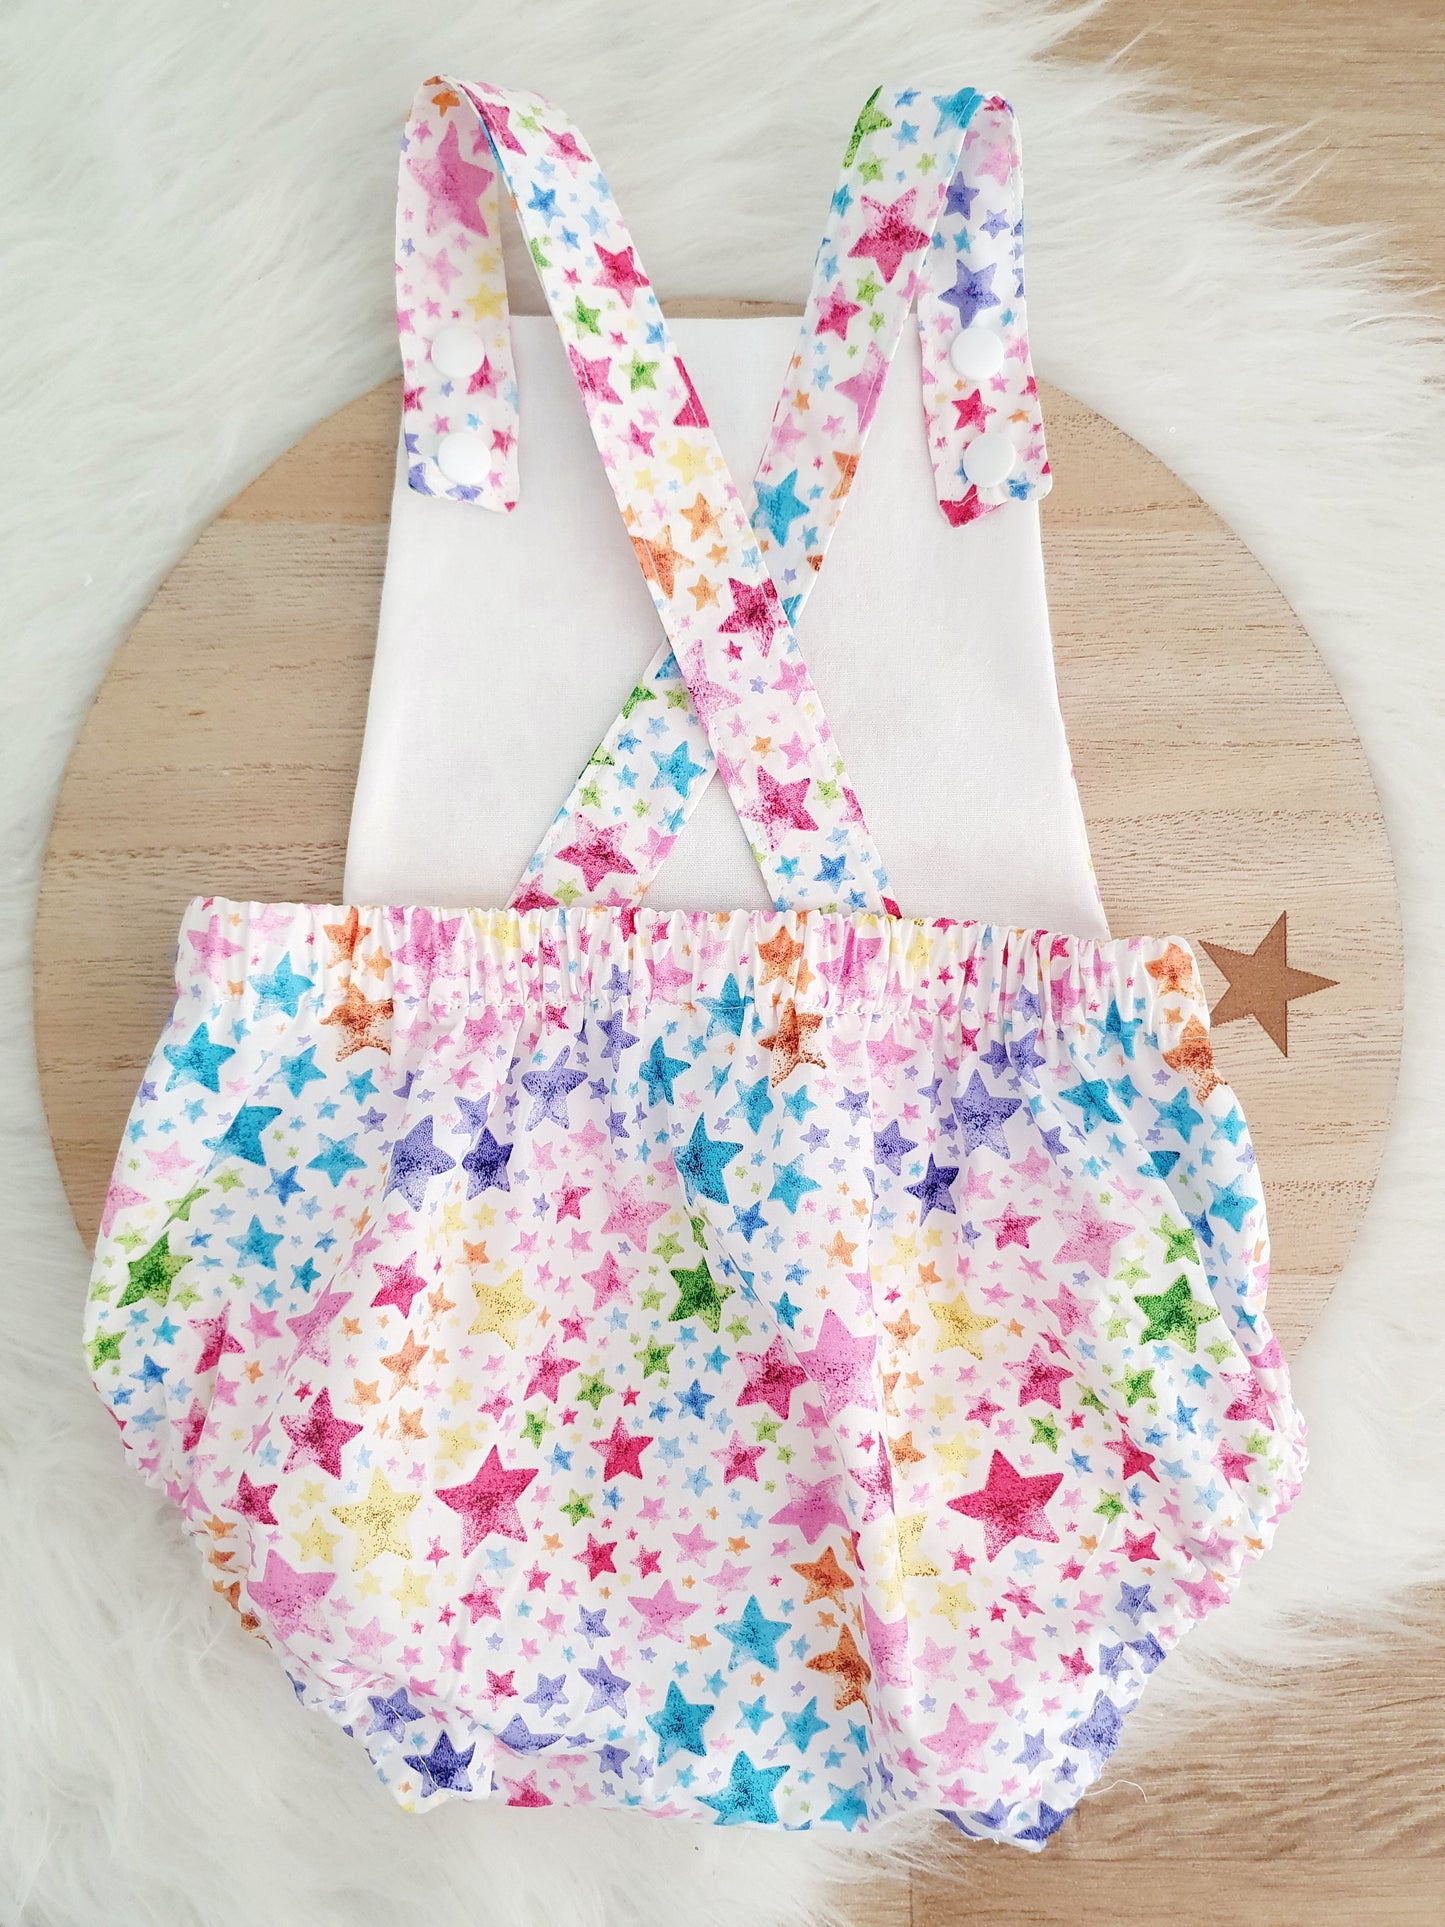 GLITTER STARS Baby Romper, Handmade Baby Clothing, Size 0 - 1st Birthday Clothing / Cake Smash Outfit - STARS, 9 - 12 months